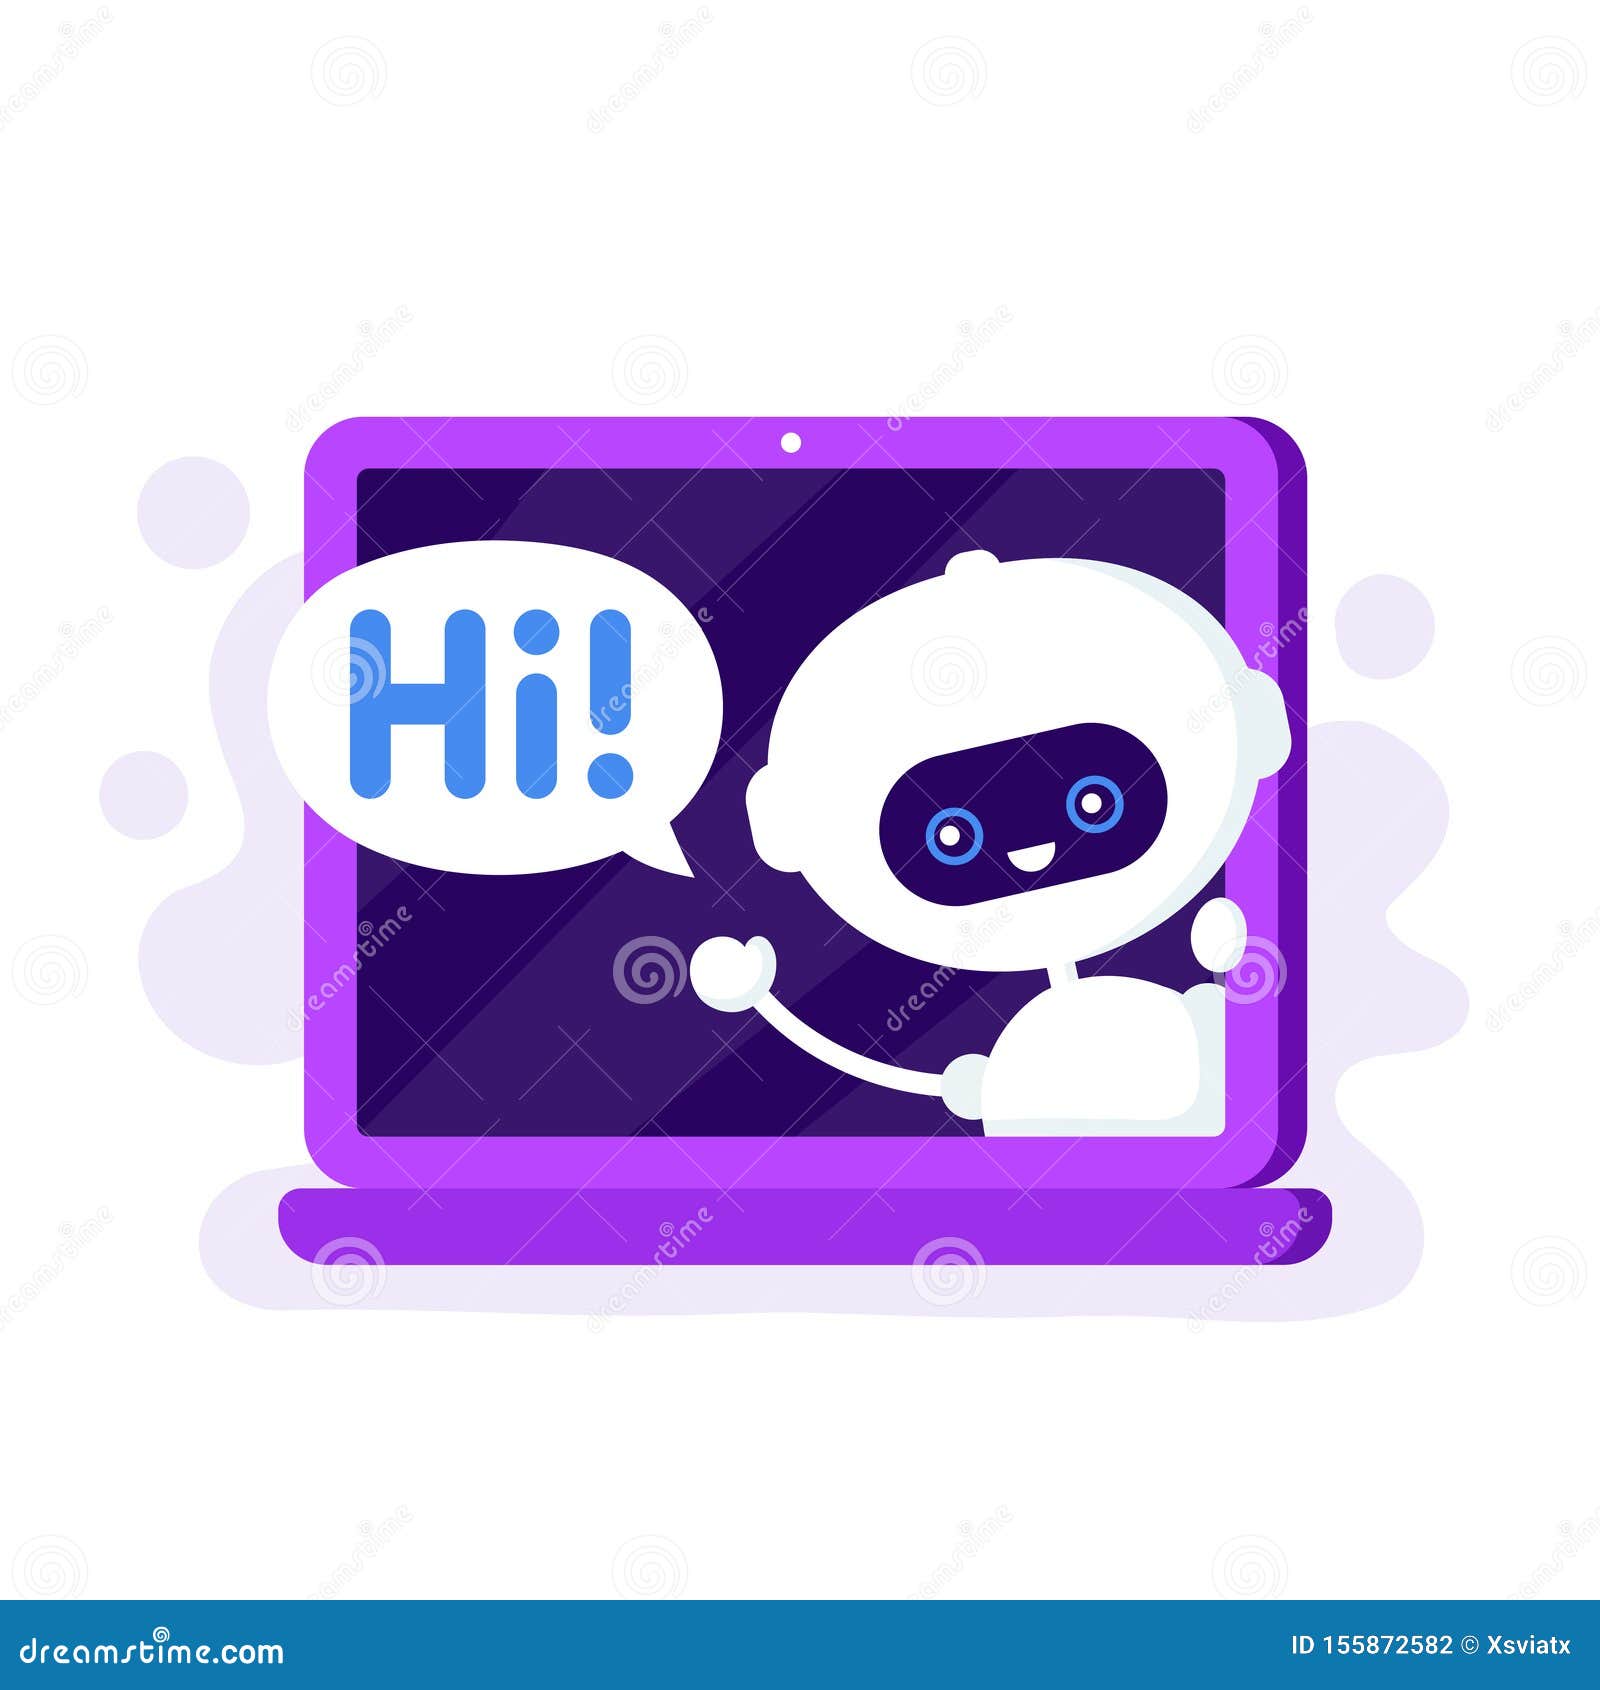 Cute Smiling Robot, Chat Bot In Laptop Stock Vector ...